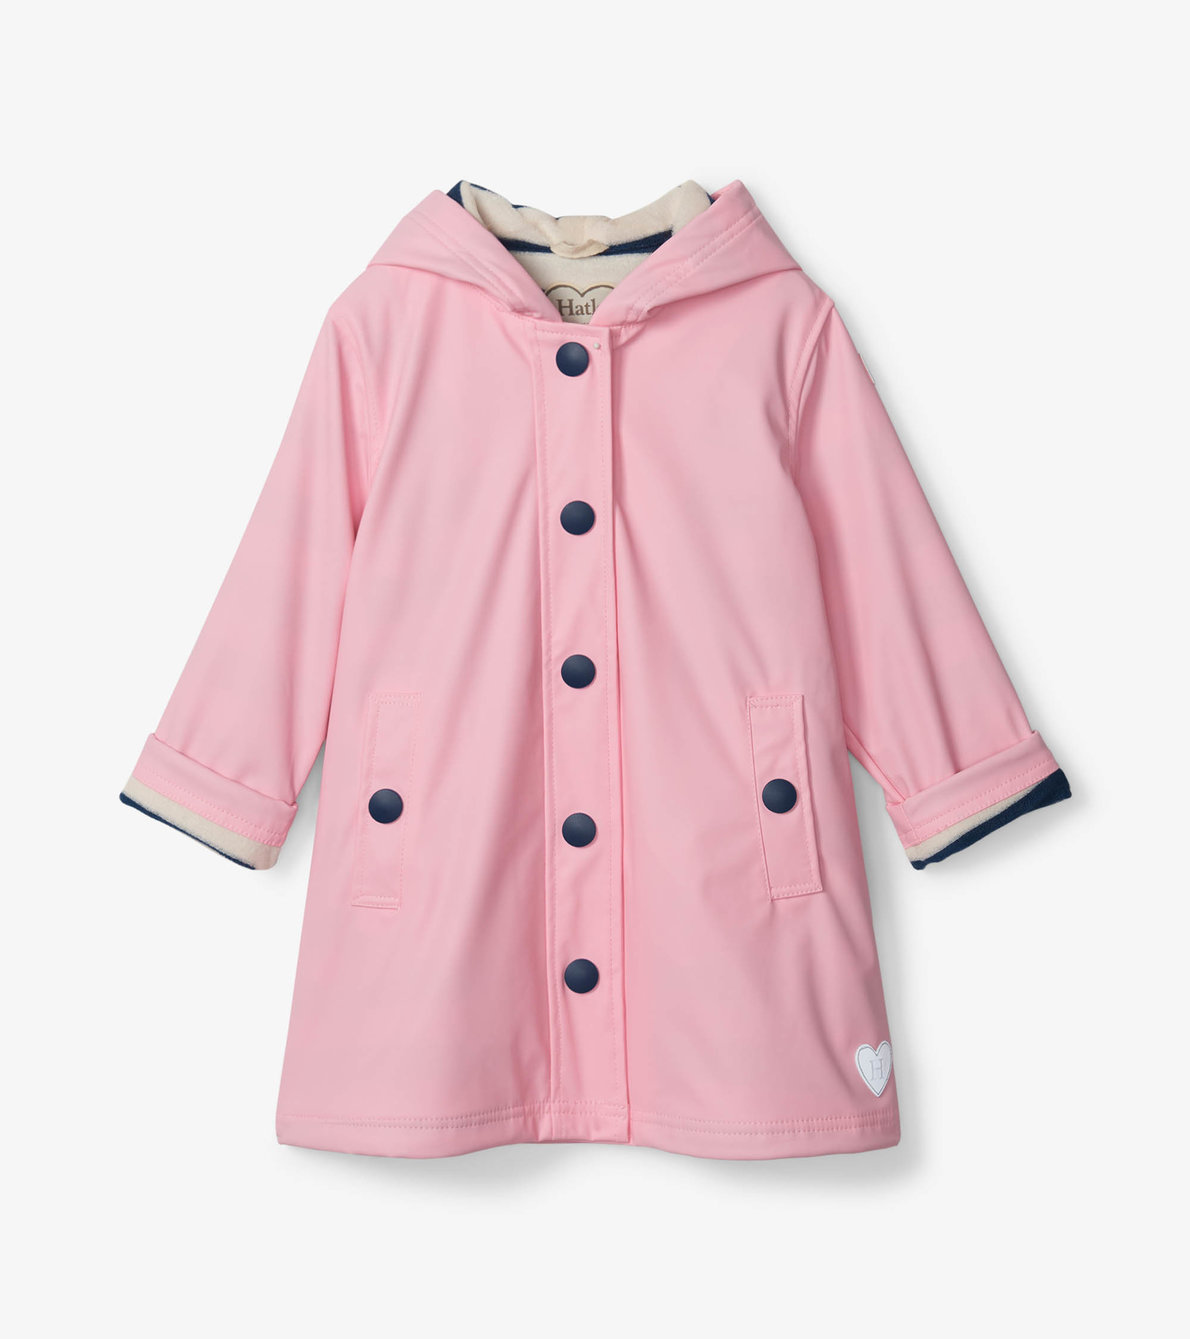 View larger image of Girls Pink & Navy Button-Up Raincoat